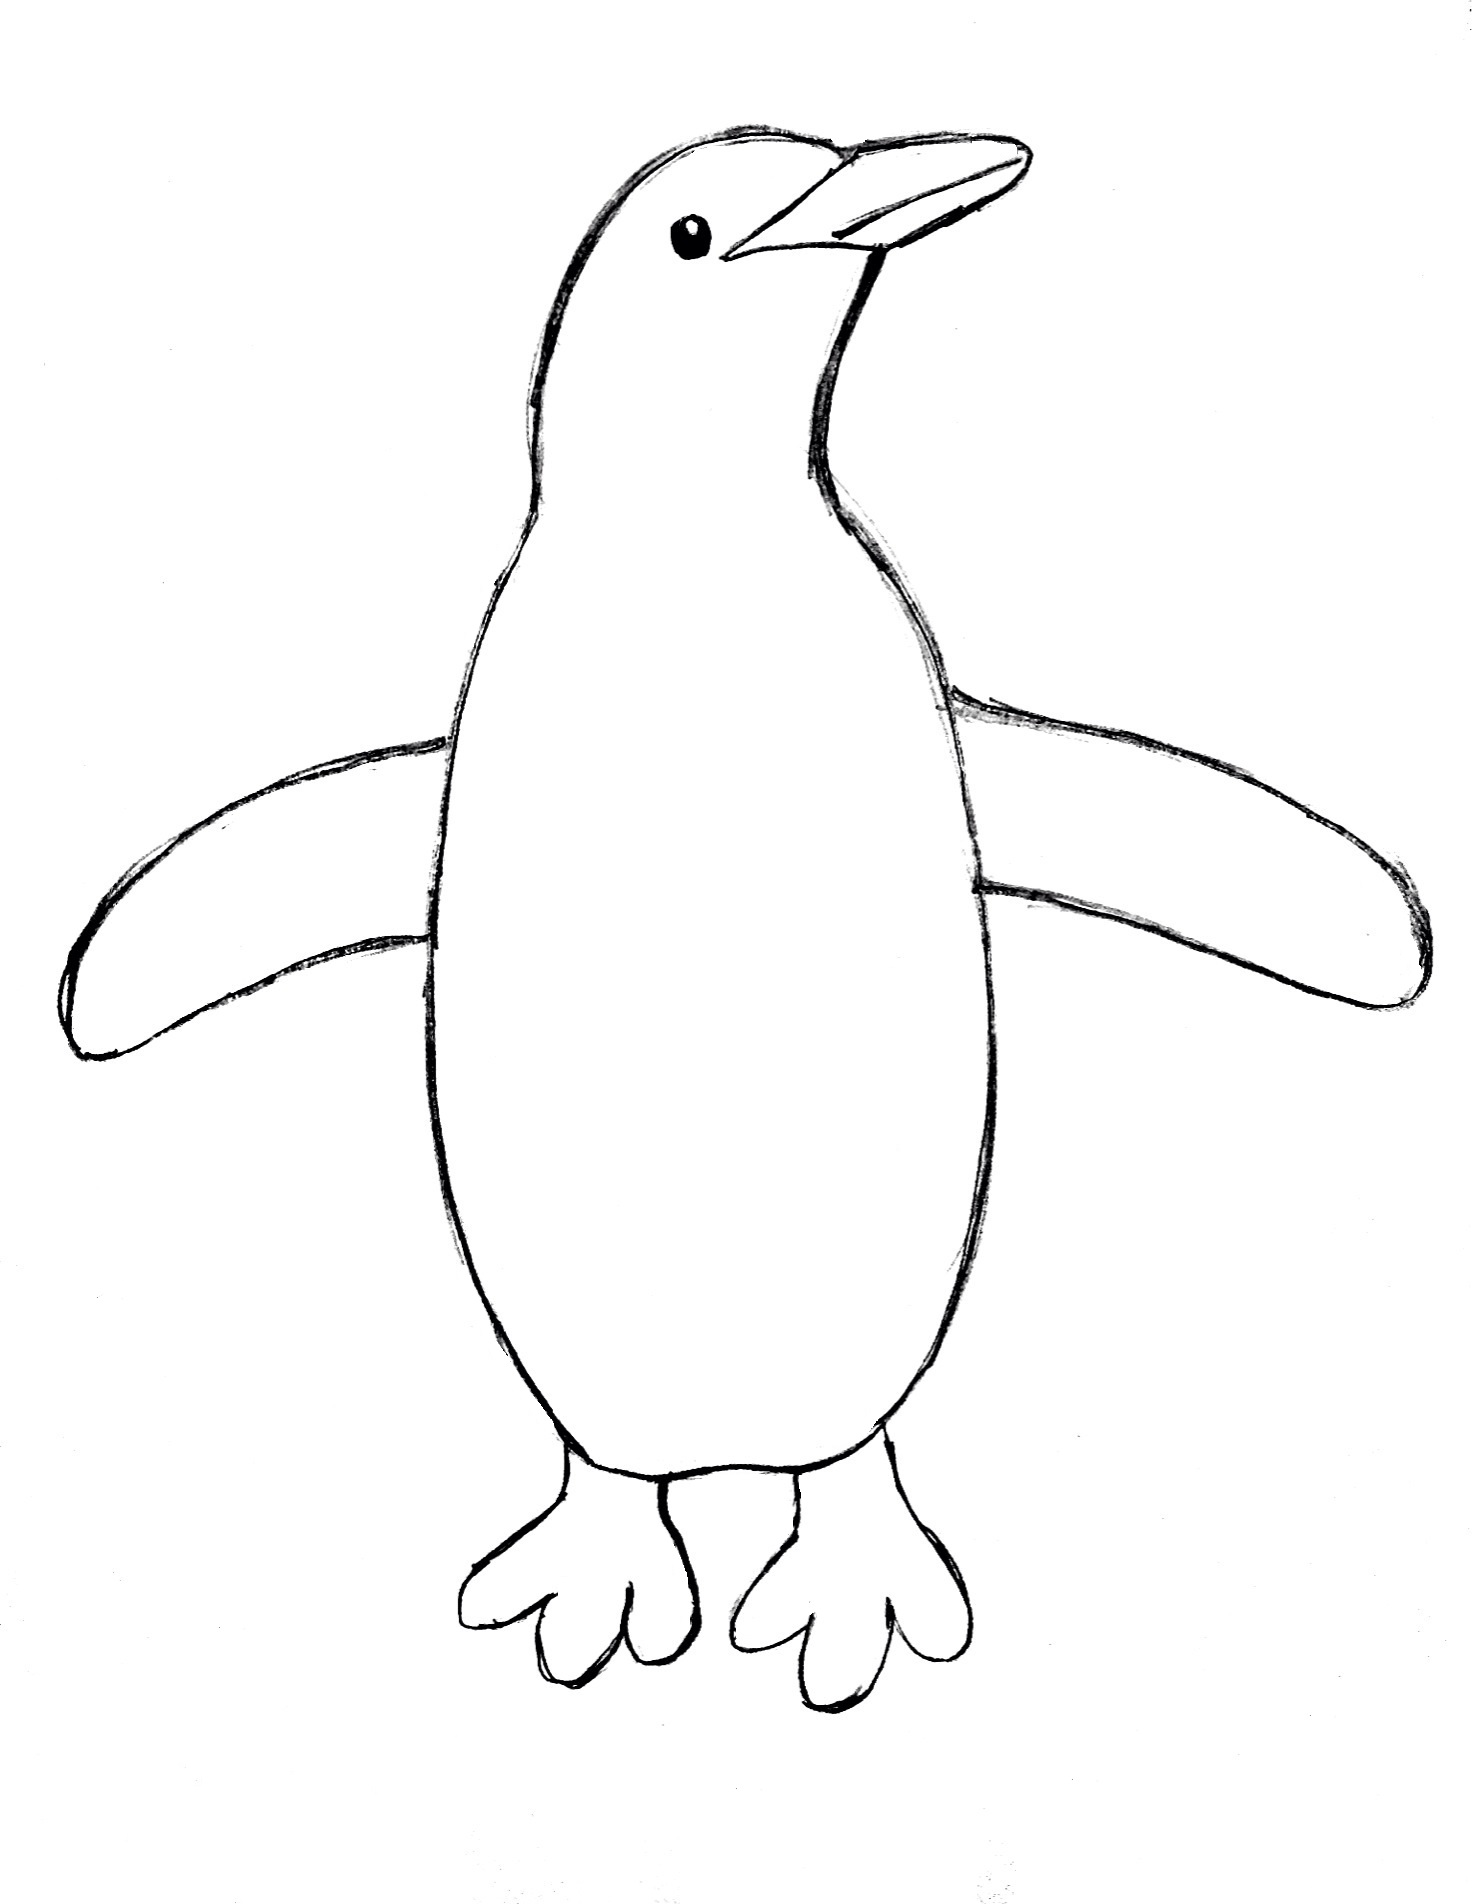 penguin-drawing8